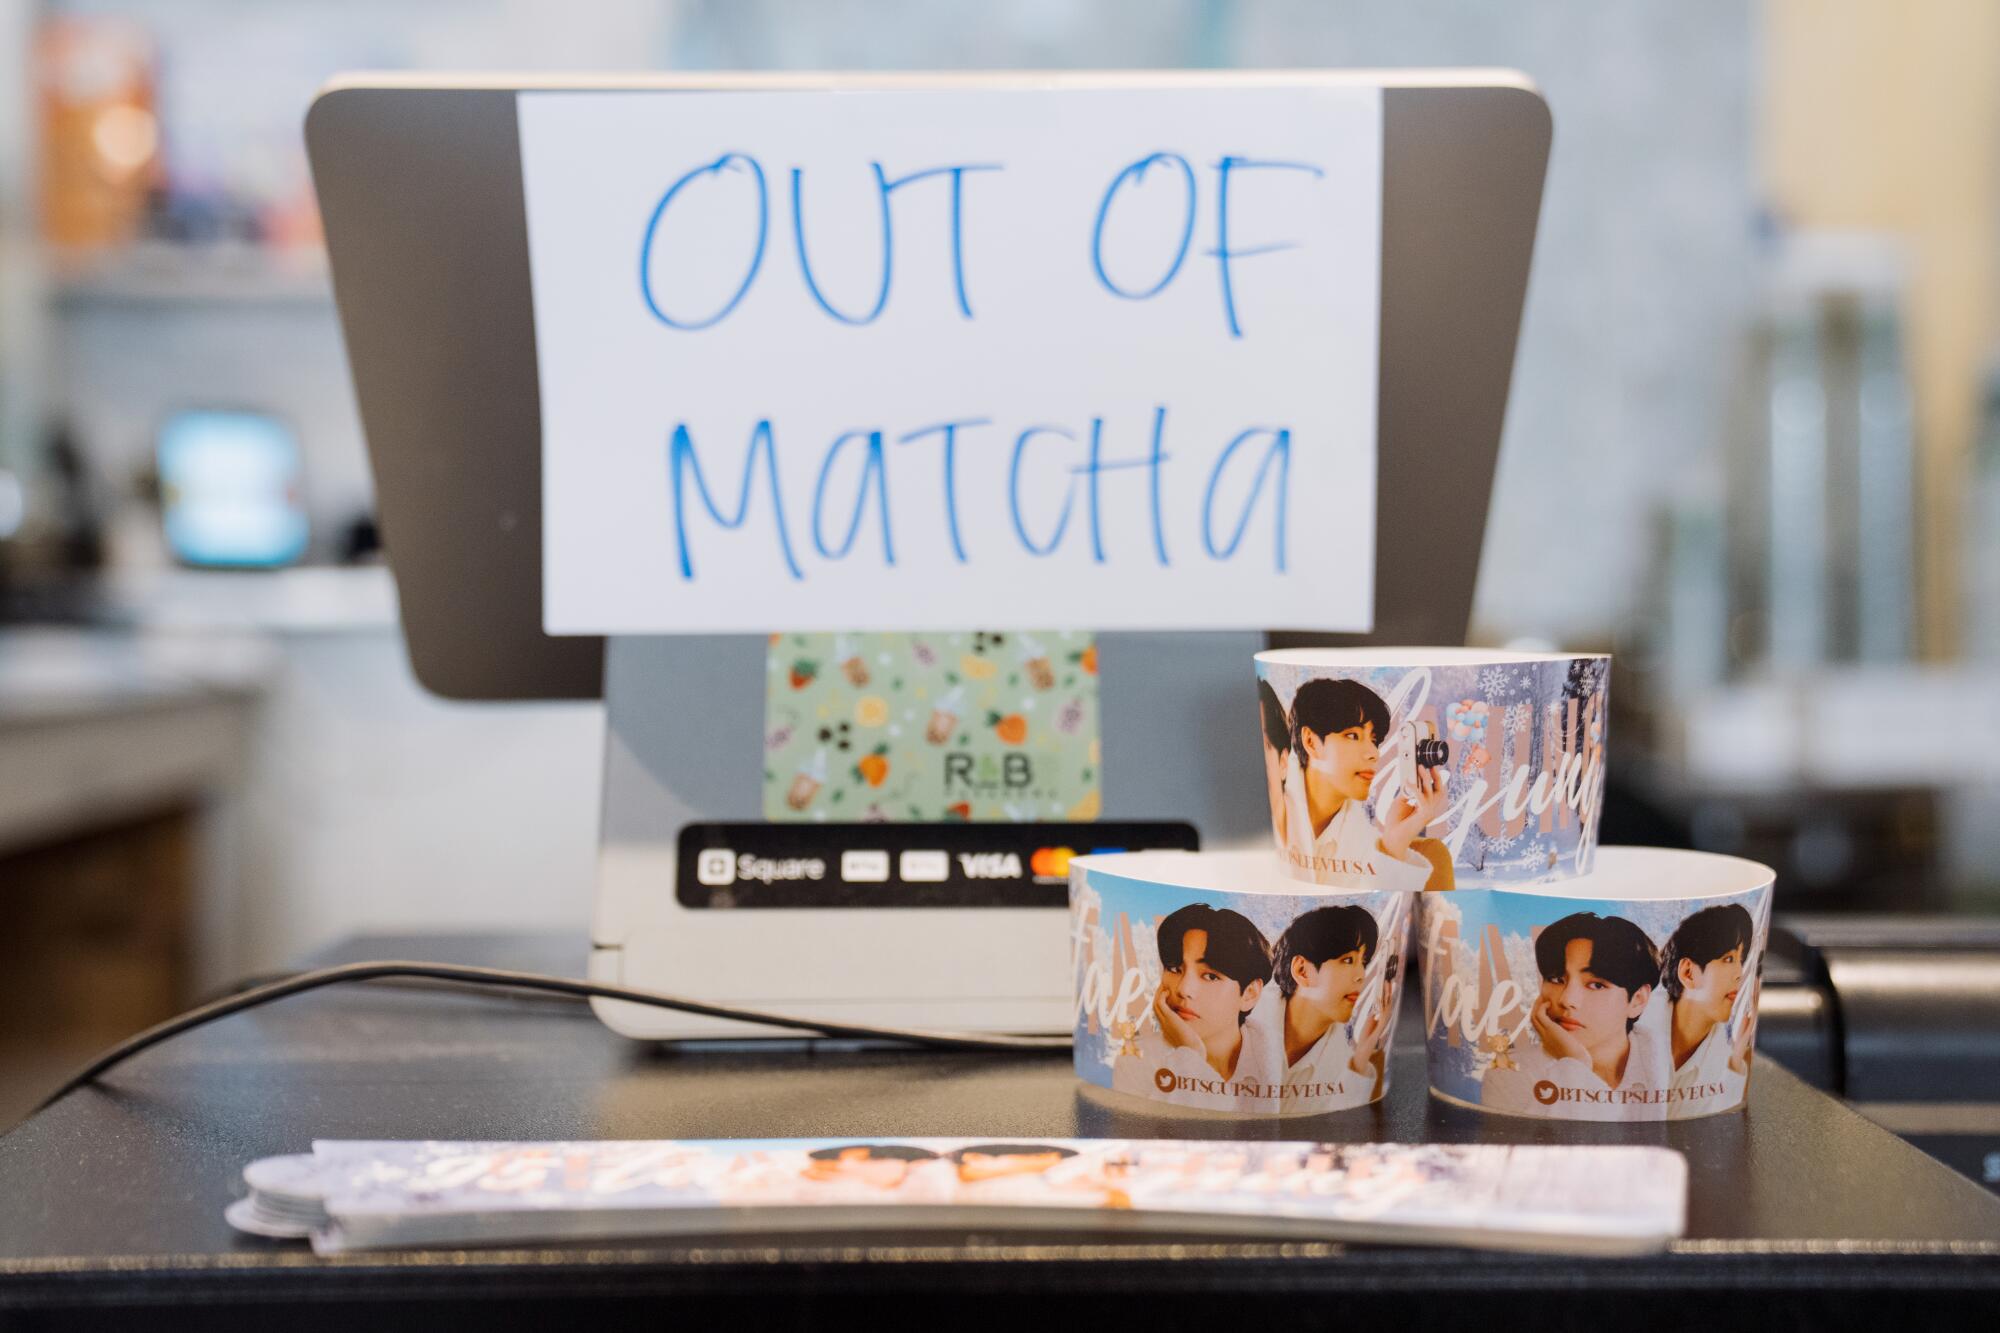 Cupsleeves with photos of Korean pop stars stacked next to a register with a sign that says Out of matcha